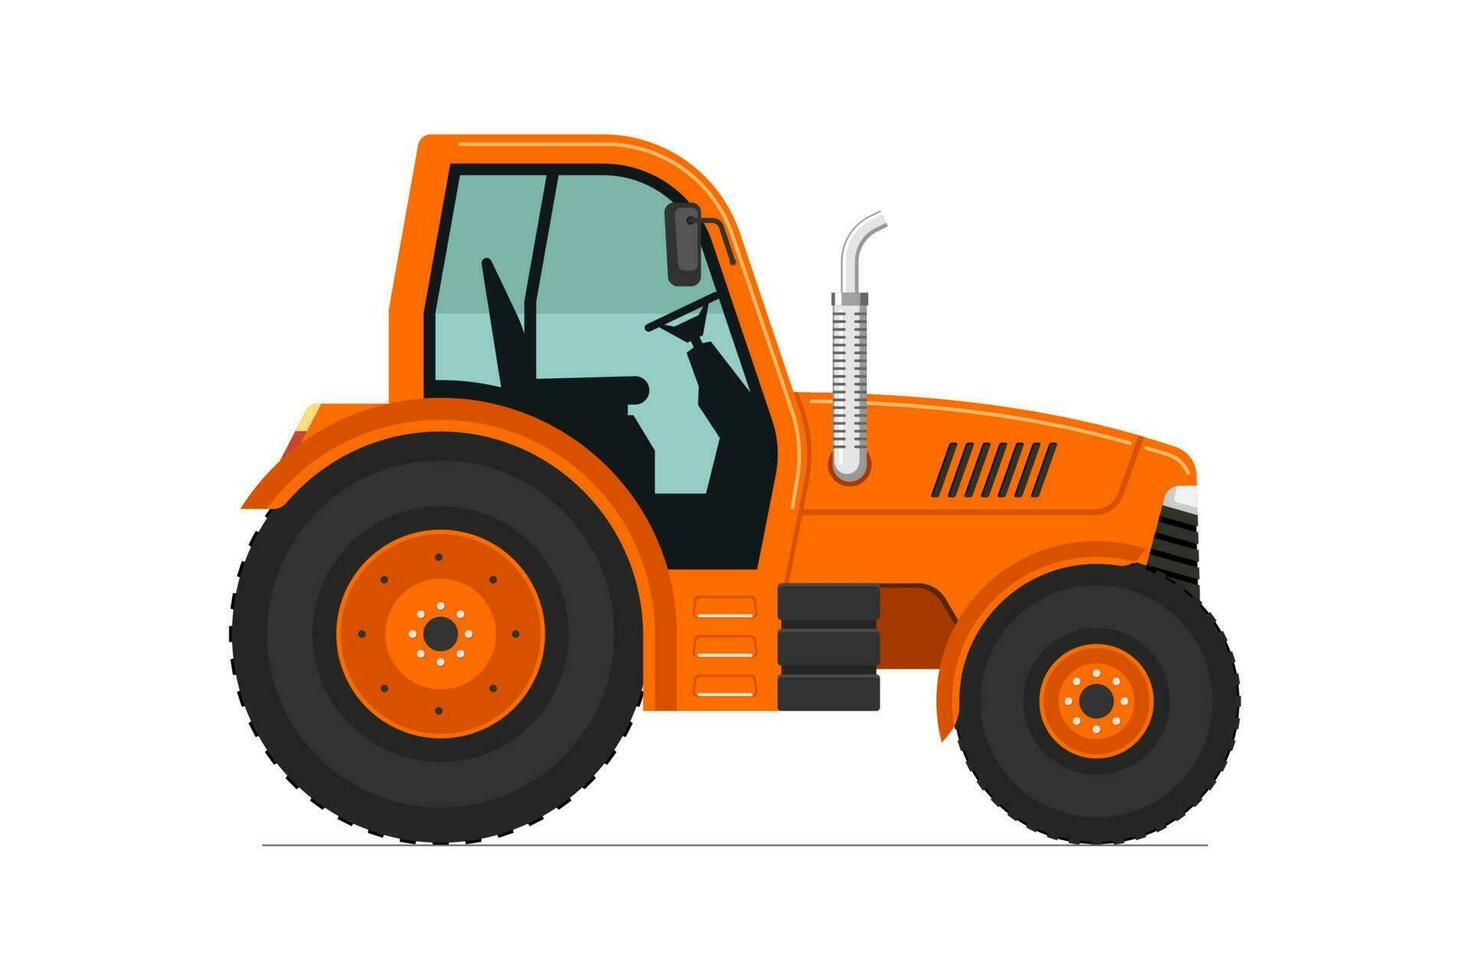 Modern wheeled farm tractor side view isolated on white background. Farming heavy machinery vehicle. Agricultural transport vector eps illustration